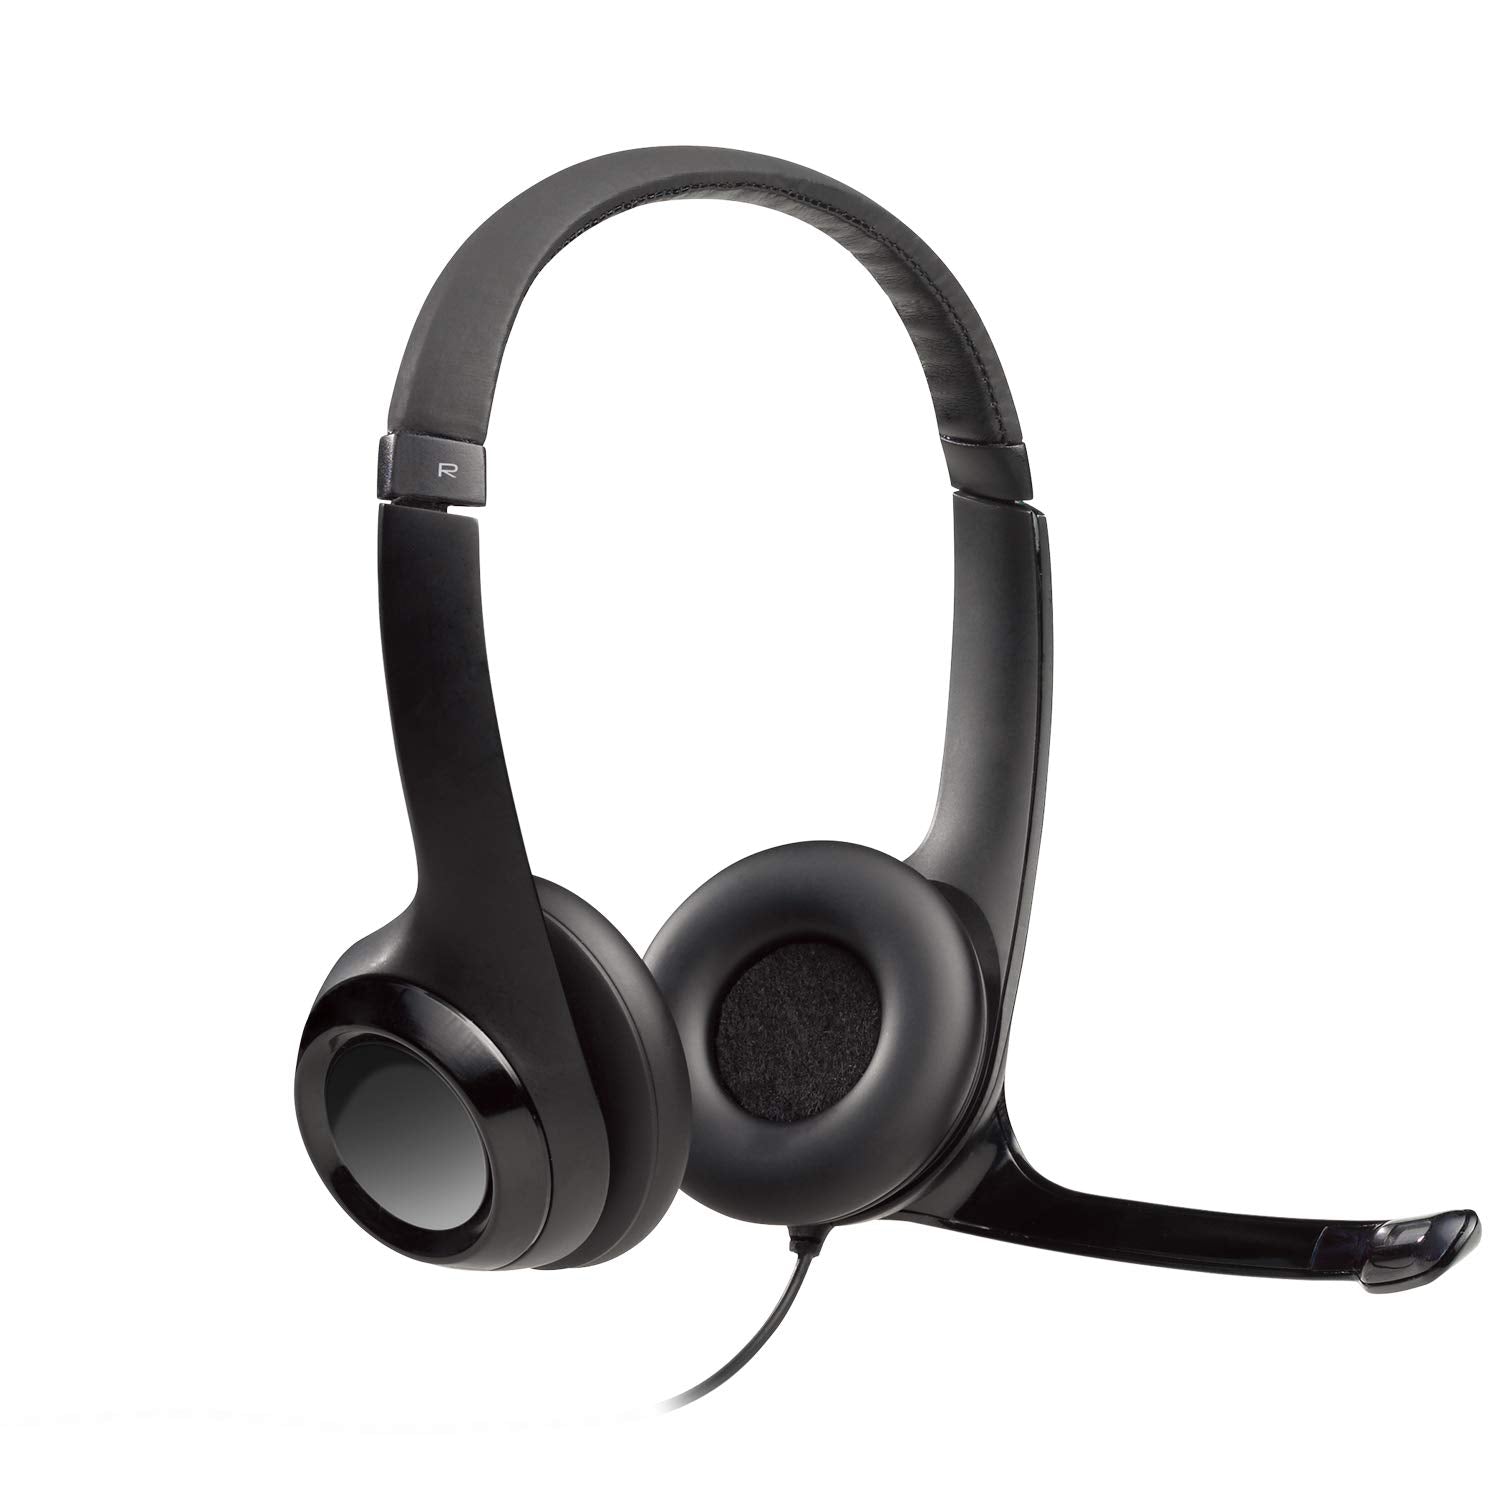 Logitech H390 Wired Headset, Stereo Headphones with Noise-Cancelling Microphone, Pack of 1 - image 1 of 1